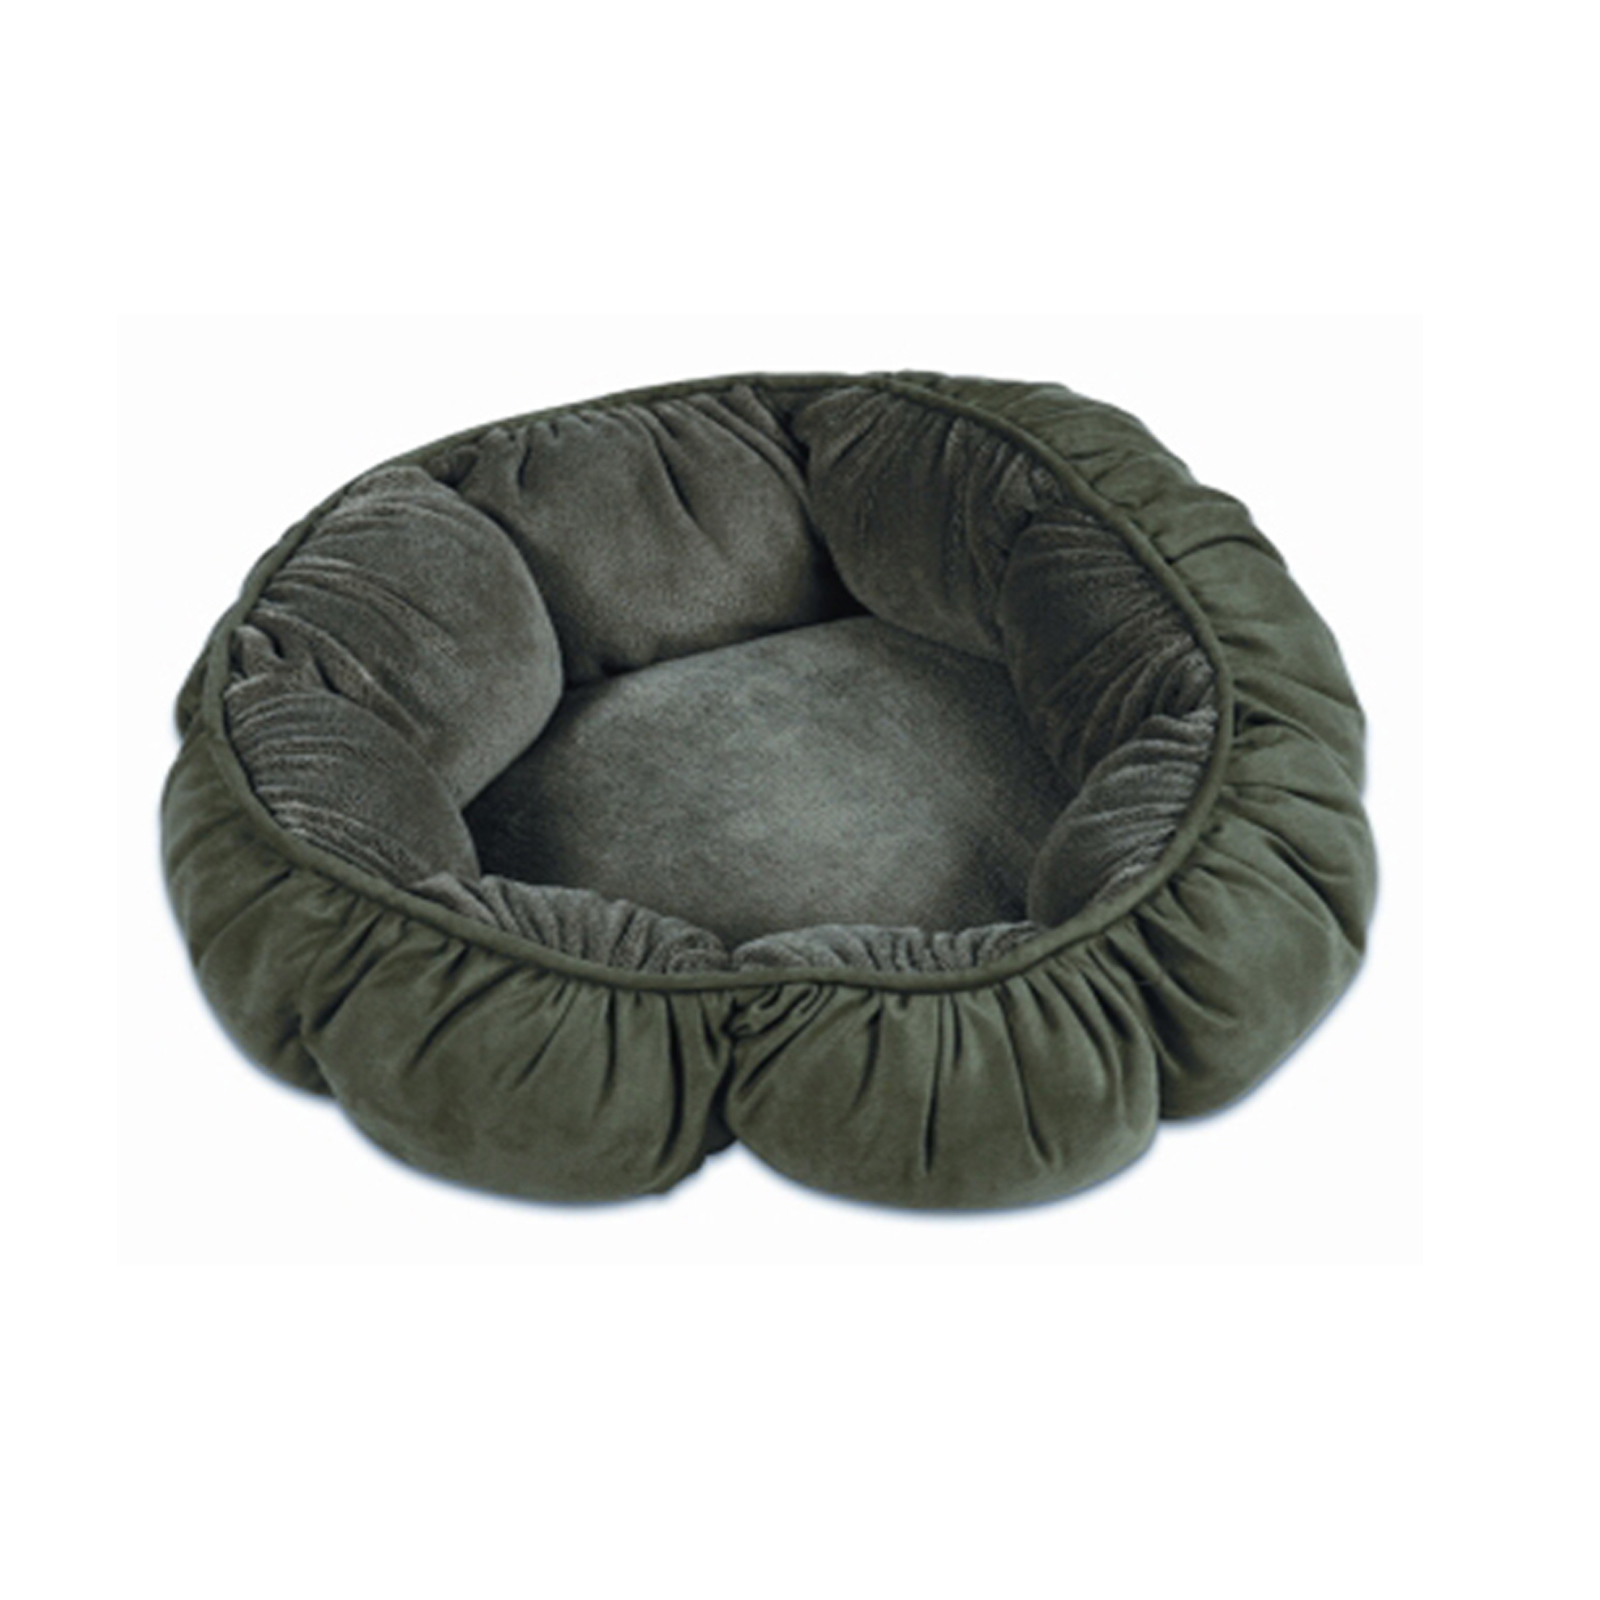 Doskocil Puffy Round Cat Bed 18 inches